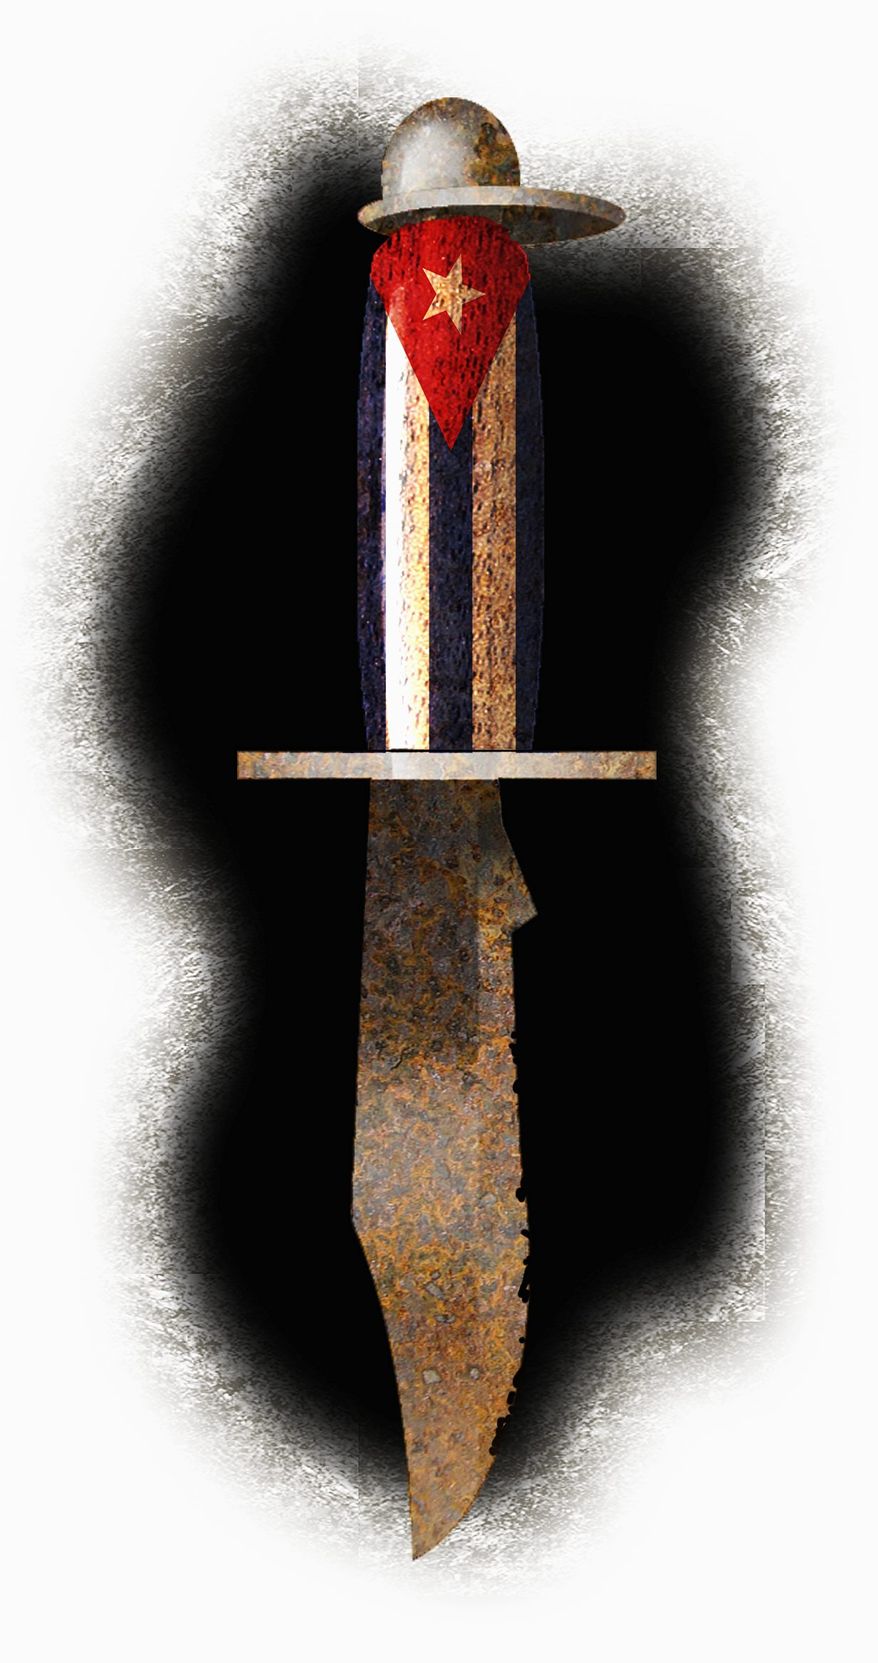 Illustration on the continuing danger posed by communist Cuba by Alexander Hunter/The Washington Times